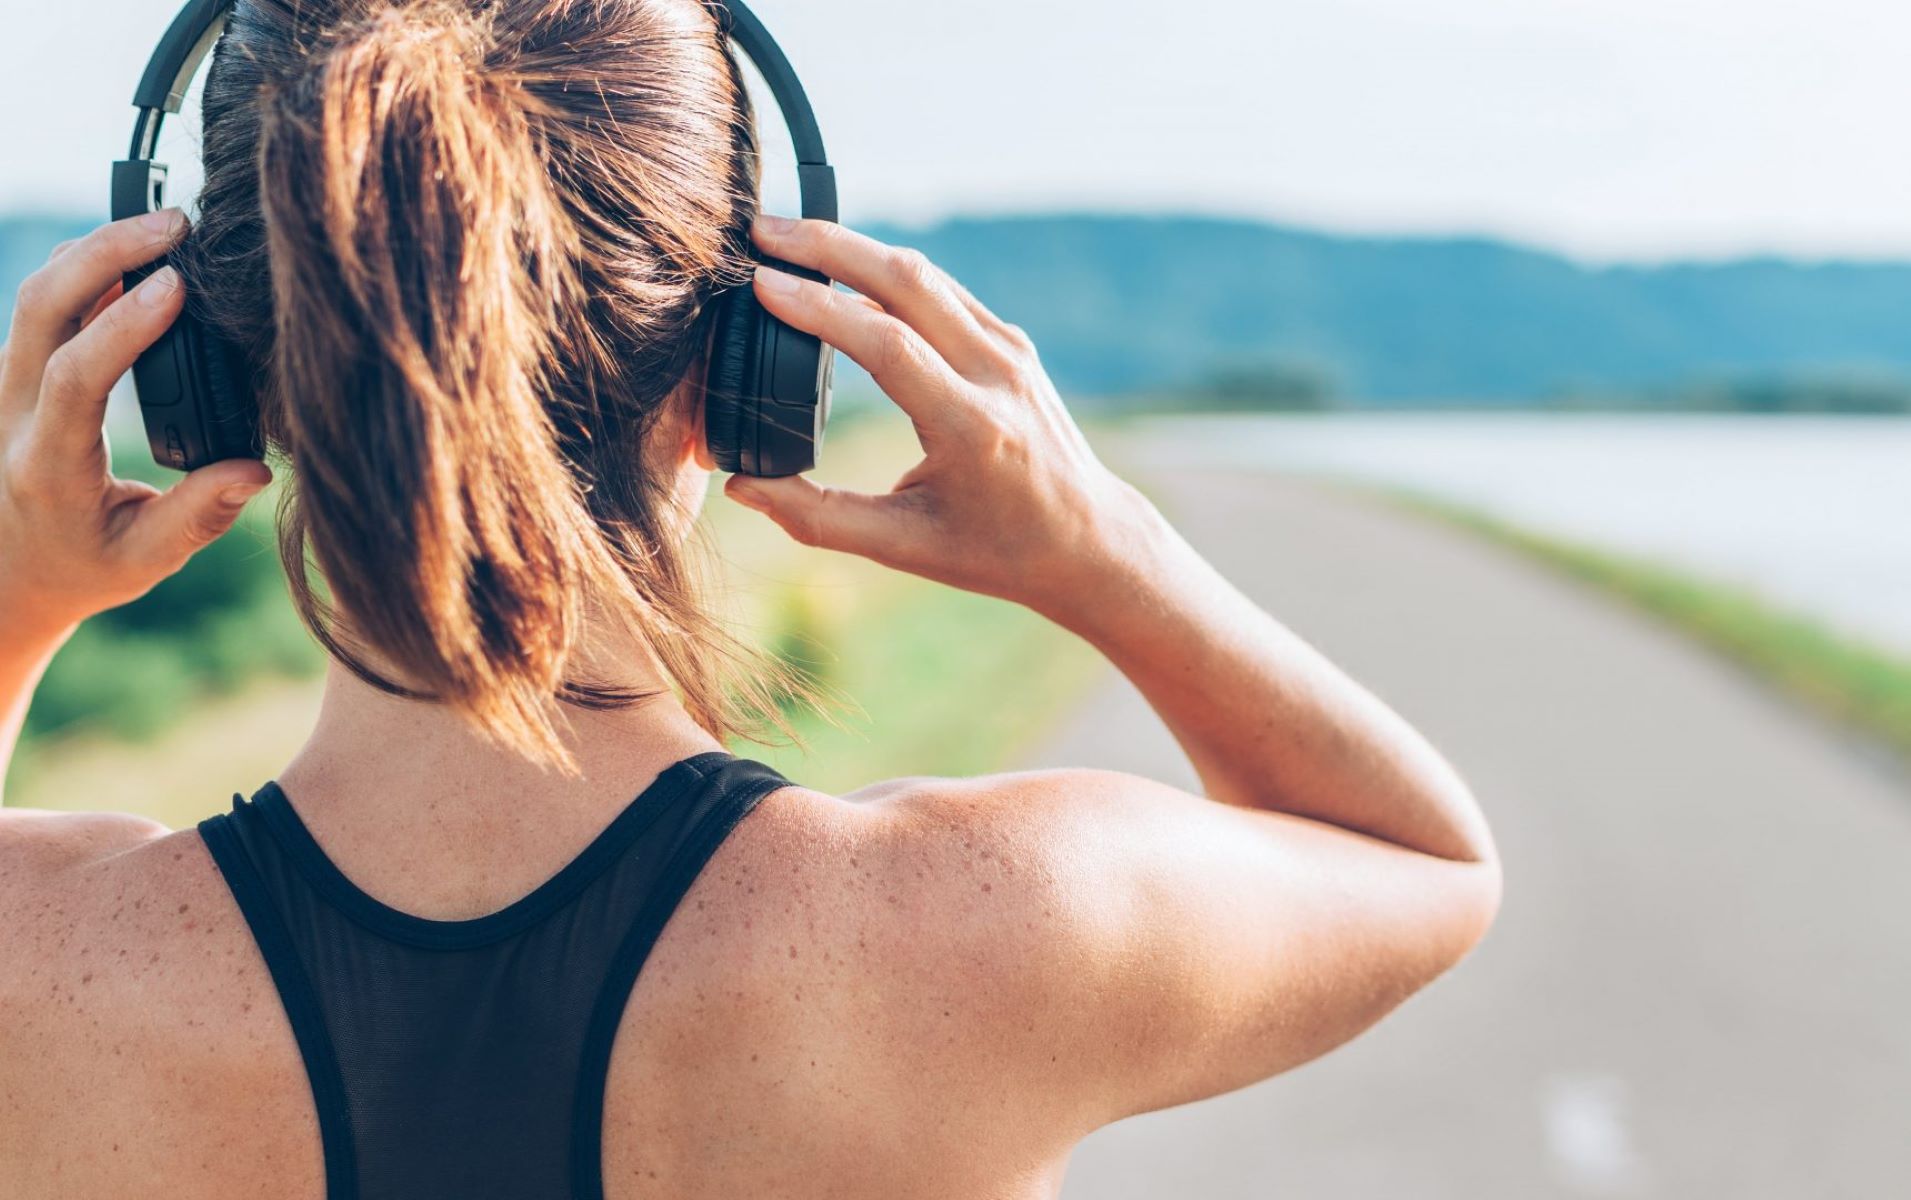 Spotify Reveals The Top Song Dominating Running Playlists